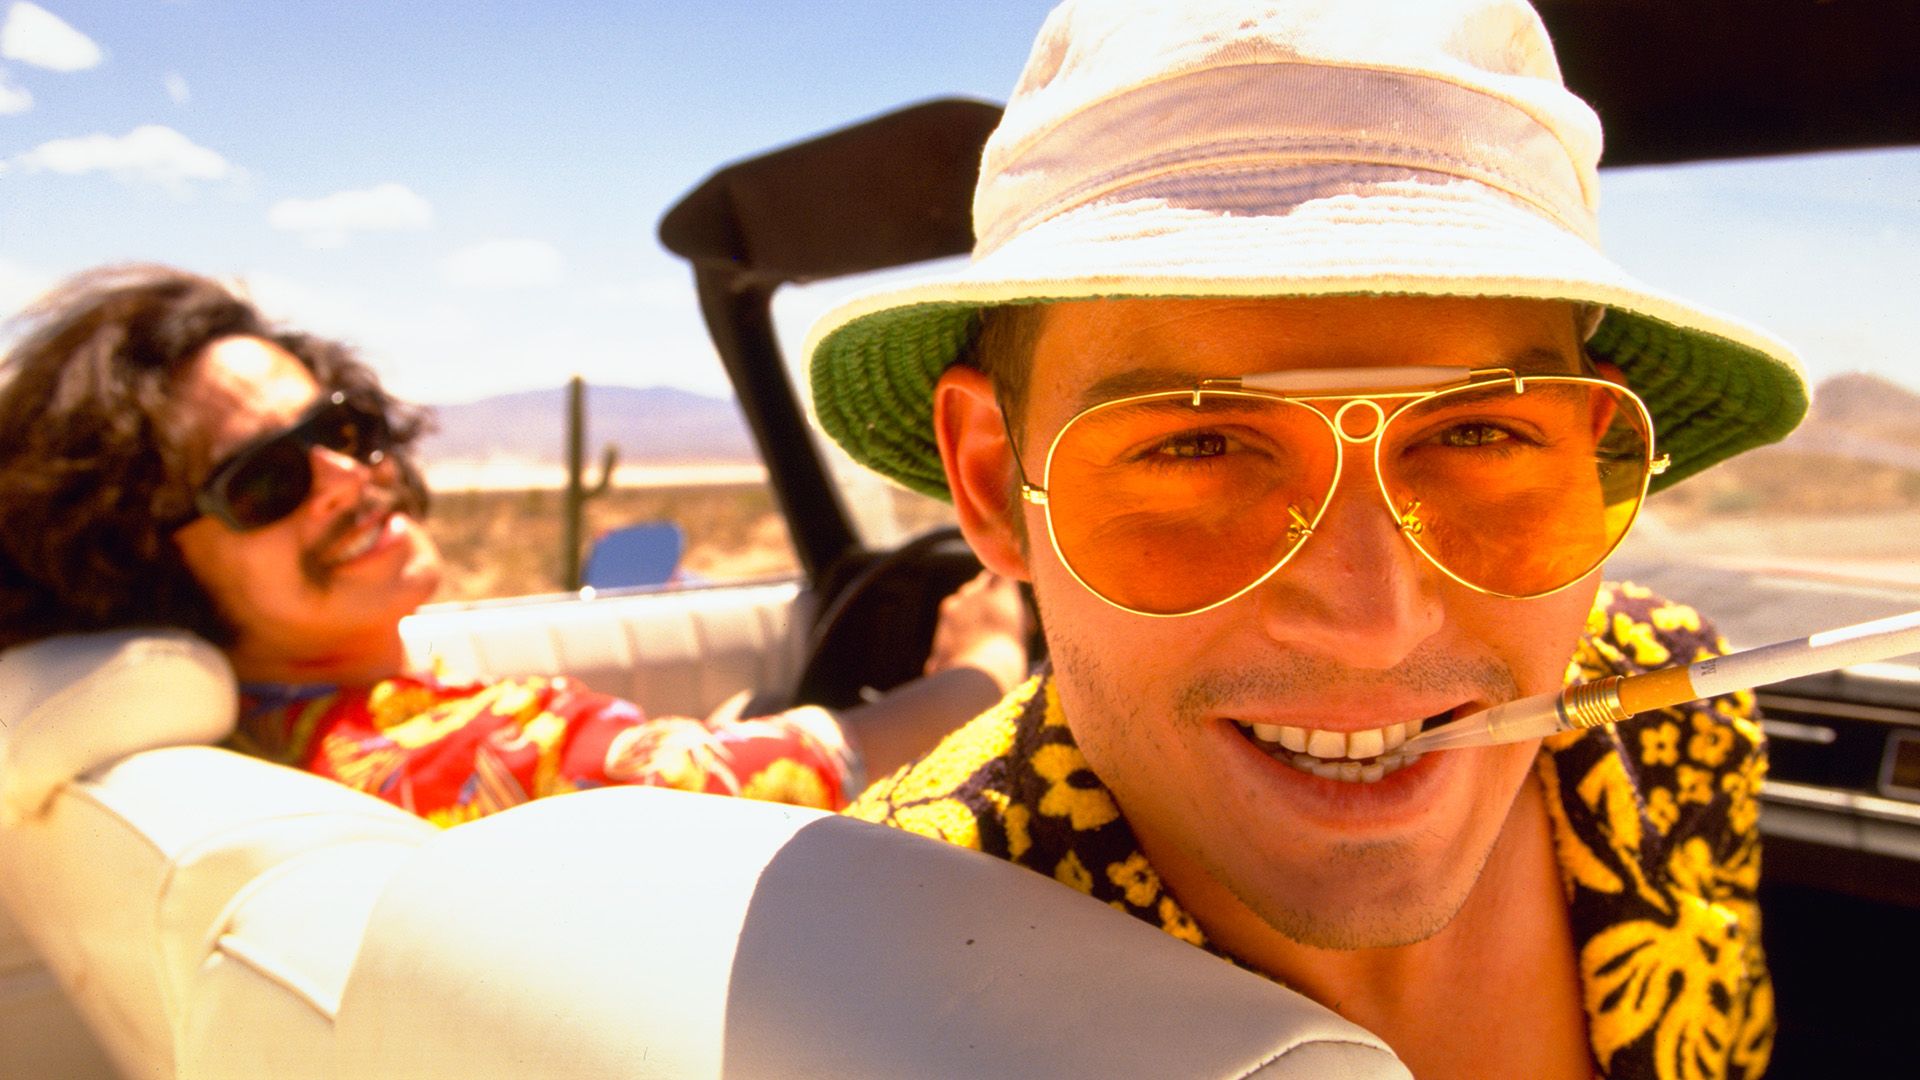 Fear and Loathing in Las Vegas background